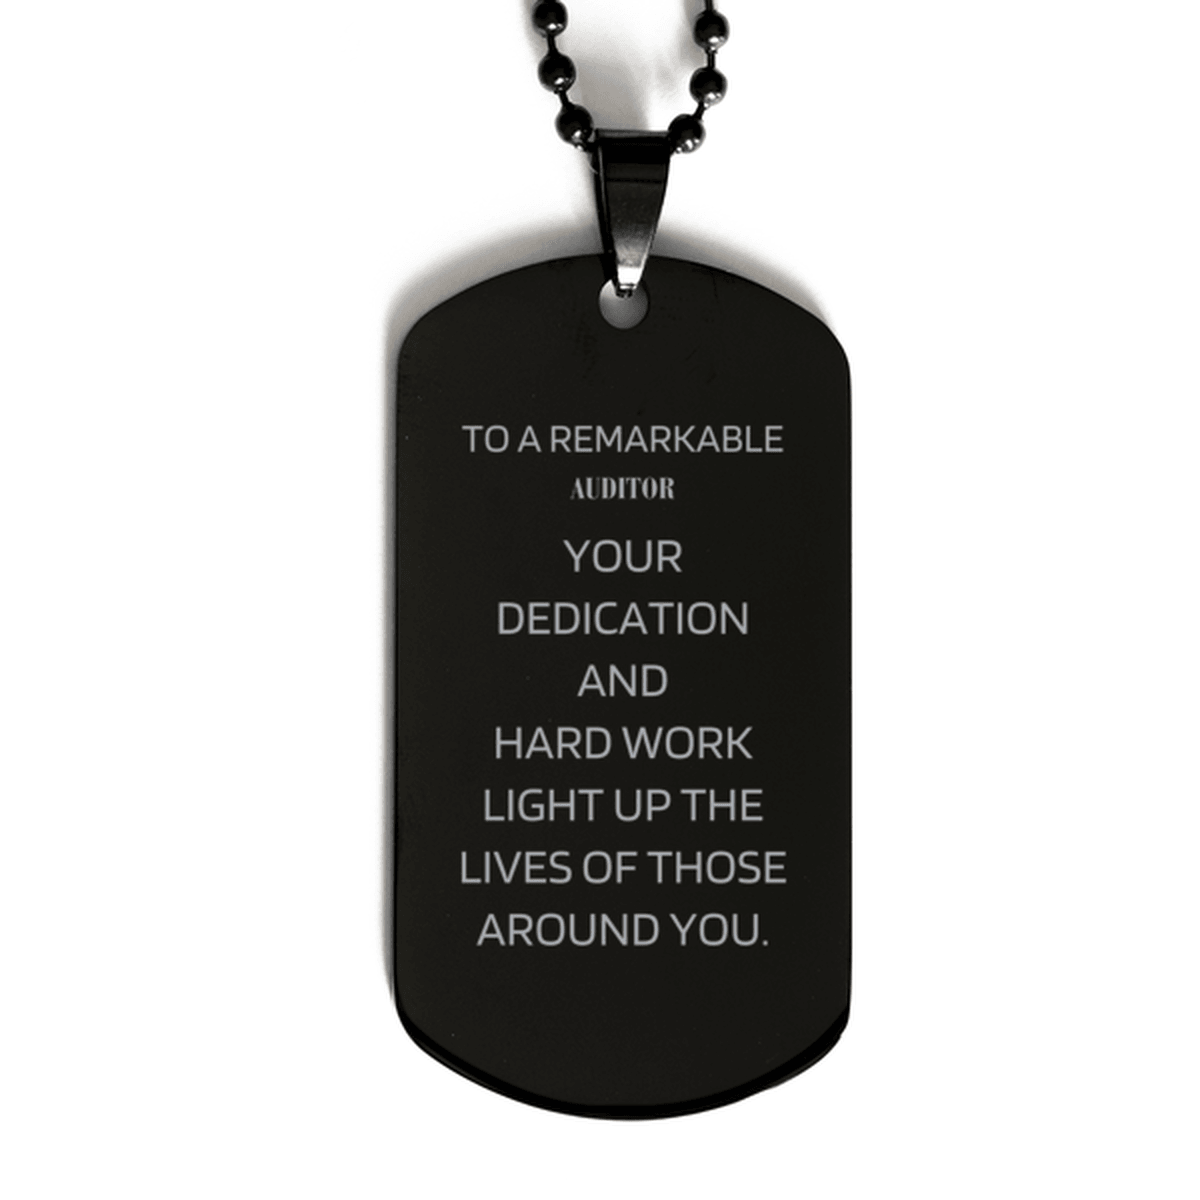 Remarkable Auditor Gifts, Your dedication and hard work, Inspirational Birthday Christmas Unique Black Dog Tag For Auditor, Coworkers, Men, Women, Friends - Mallard Moon Gift Shop